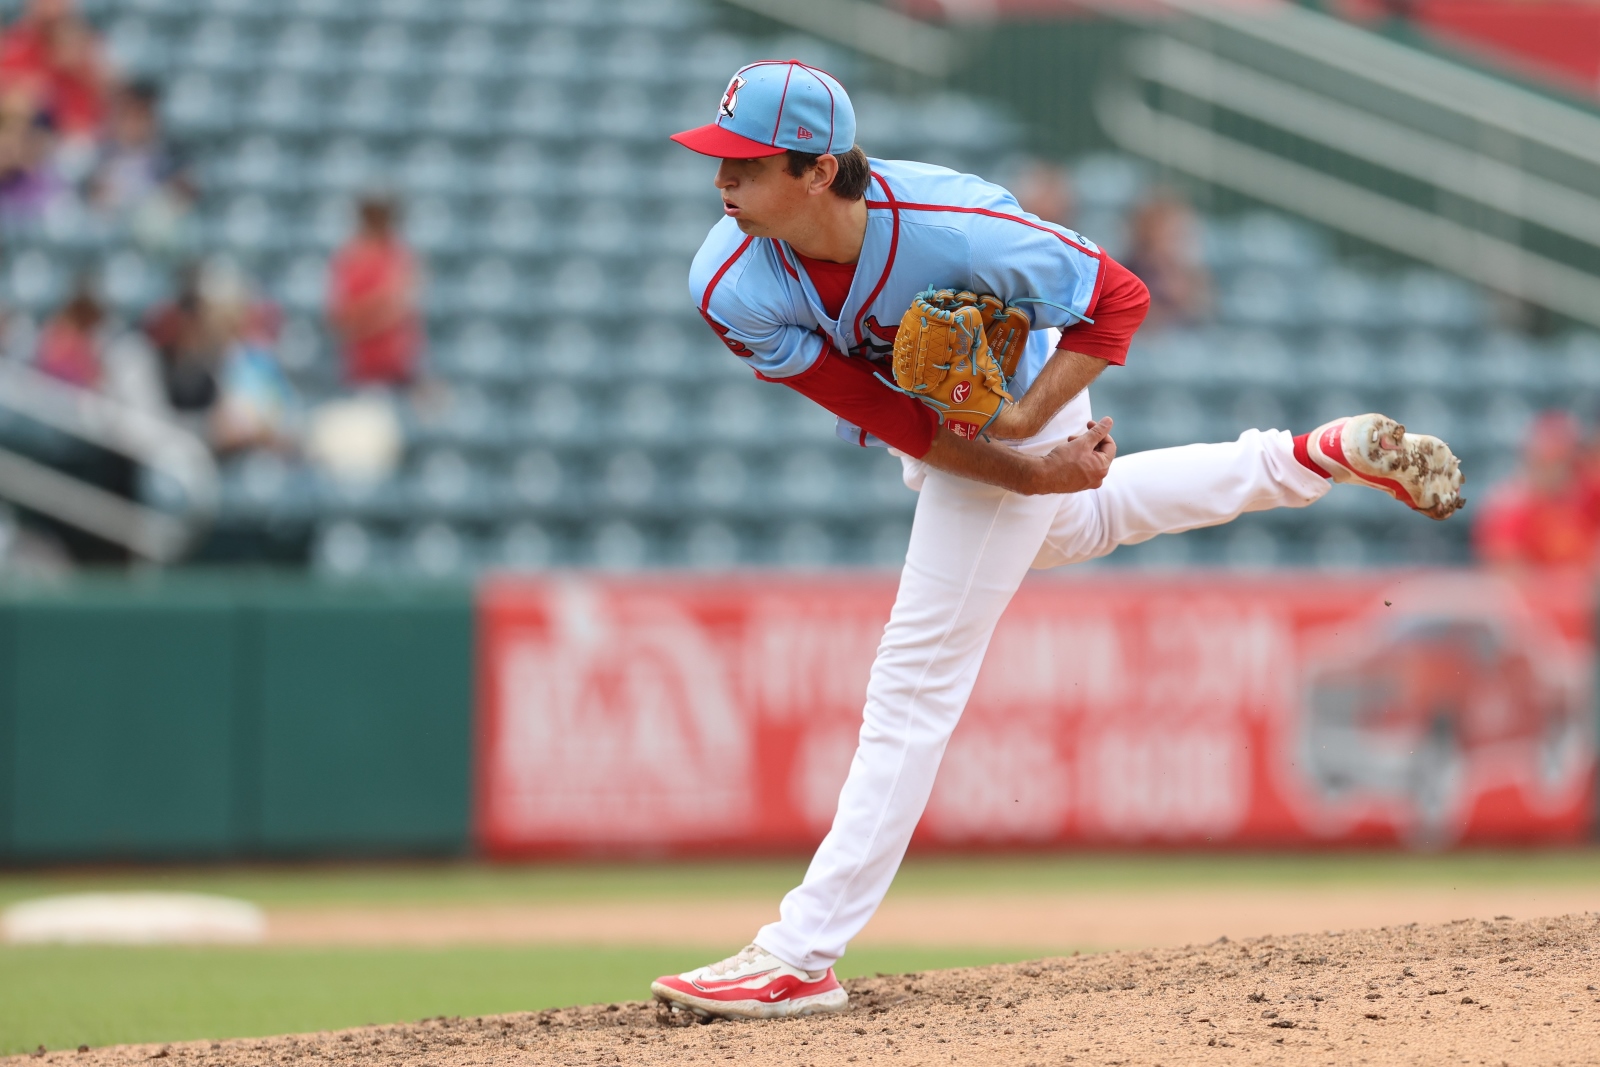 Ian Bedell, wearing a Springfield Cardinals uniform, pitches the baseball during a game at Hammons Field in Springfield, Missouri.